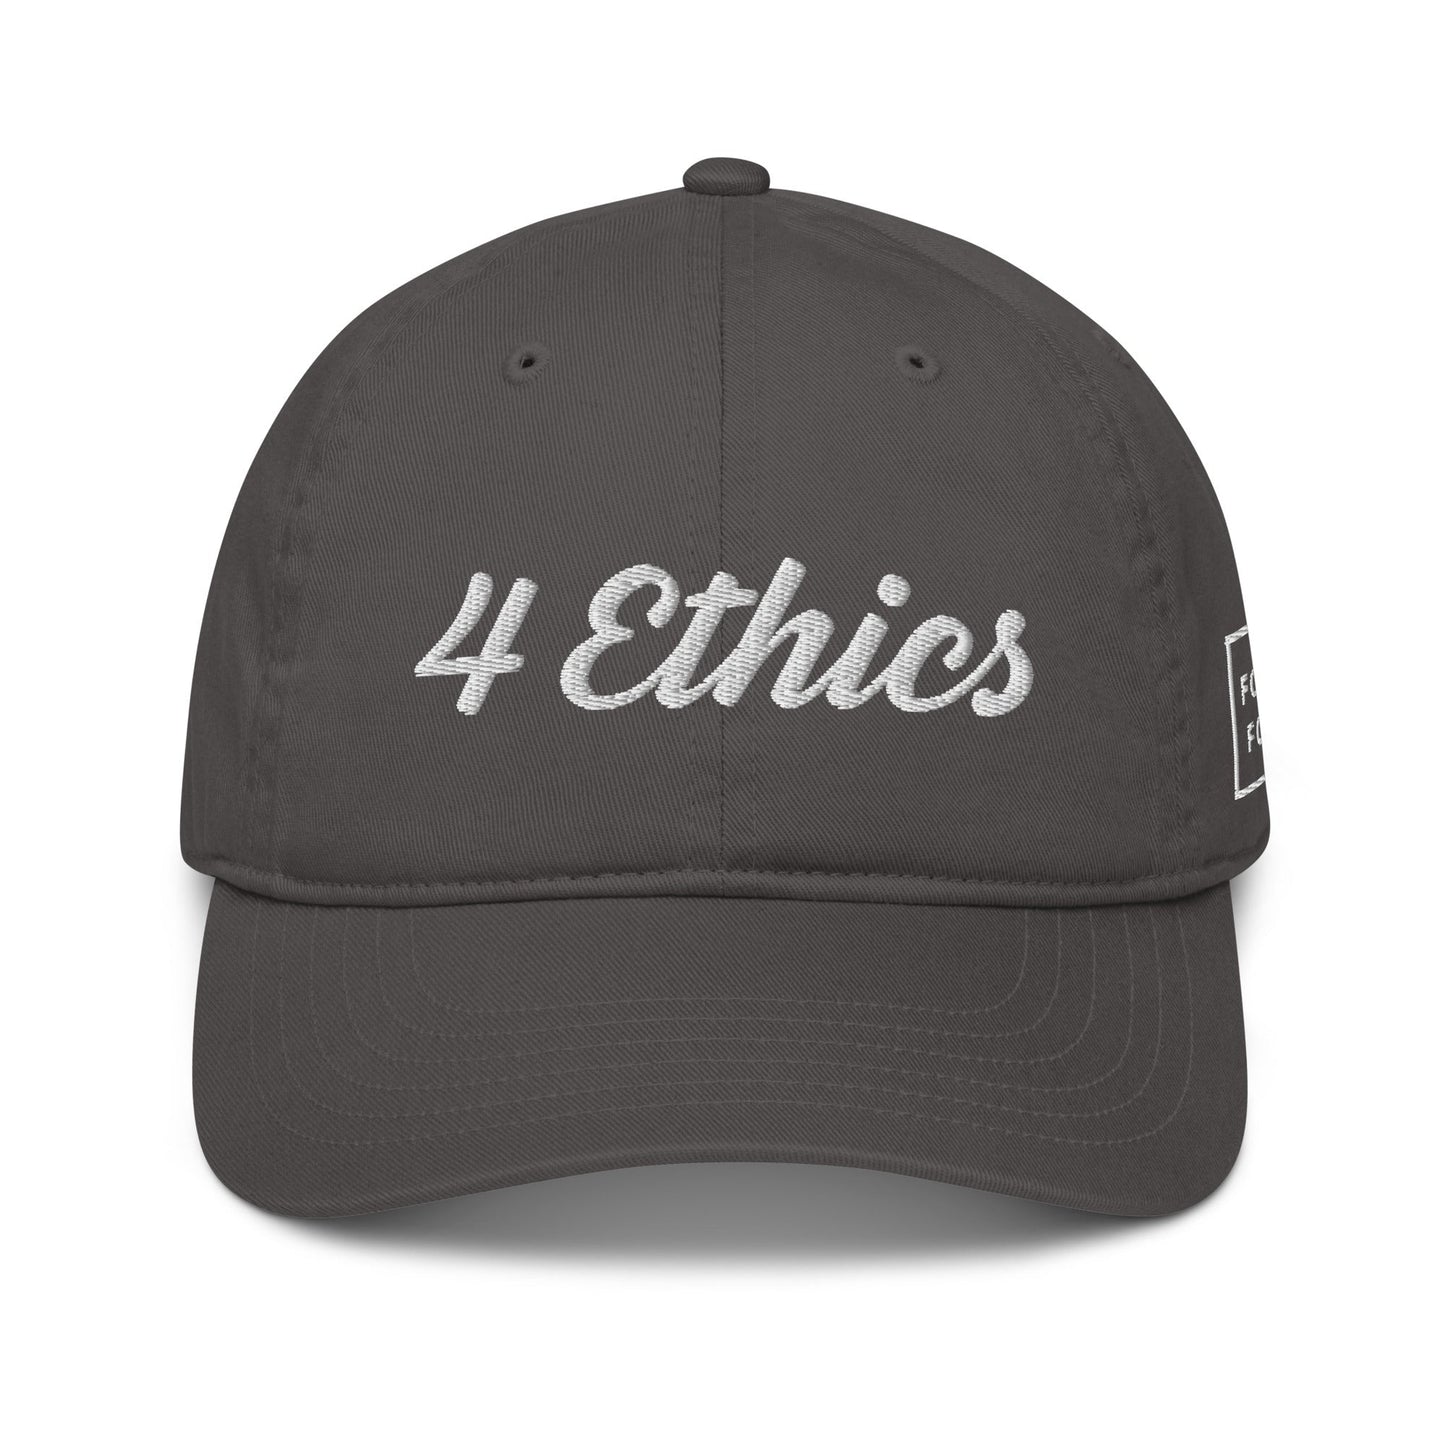 4 Ethics Organic Hat - For Health For Ethics - Charcoal - Front